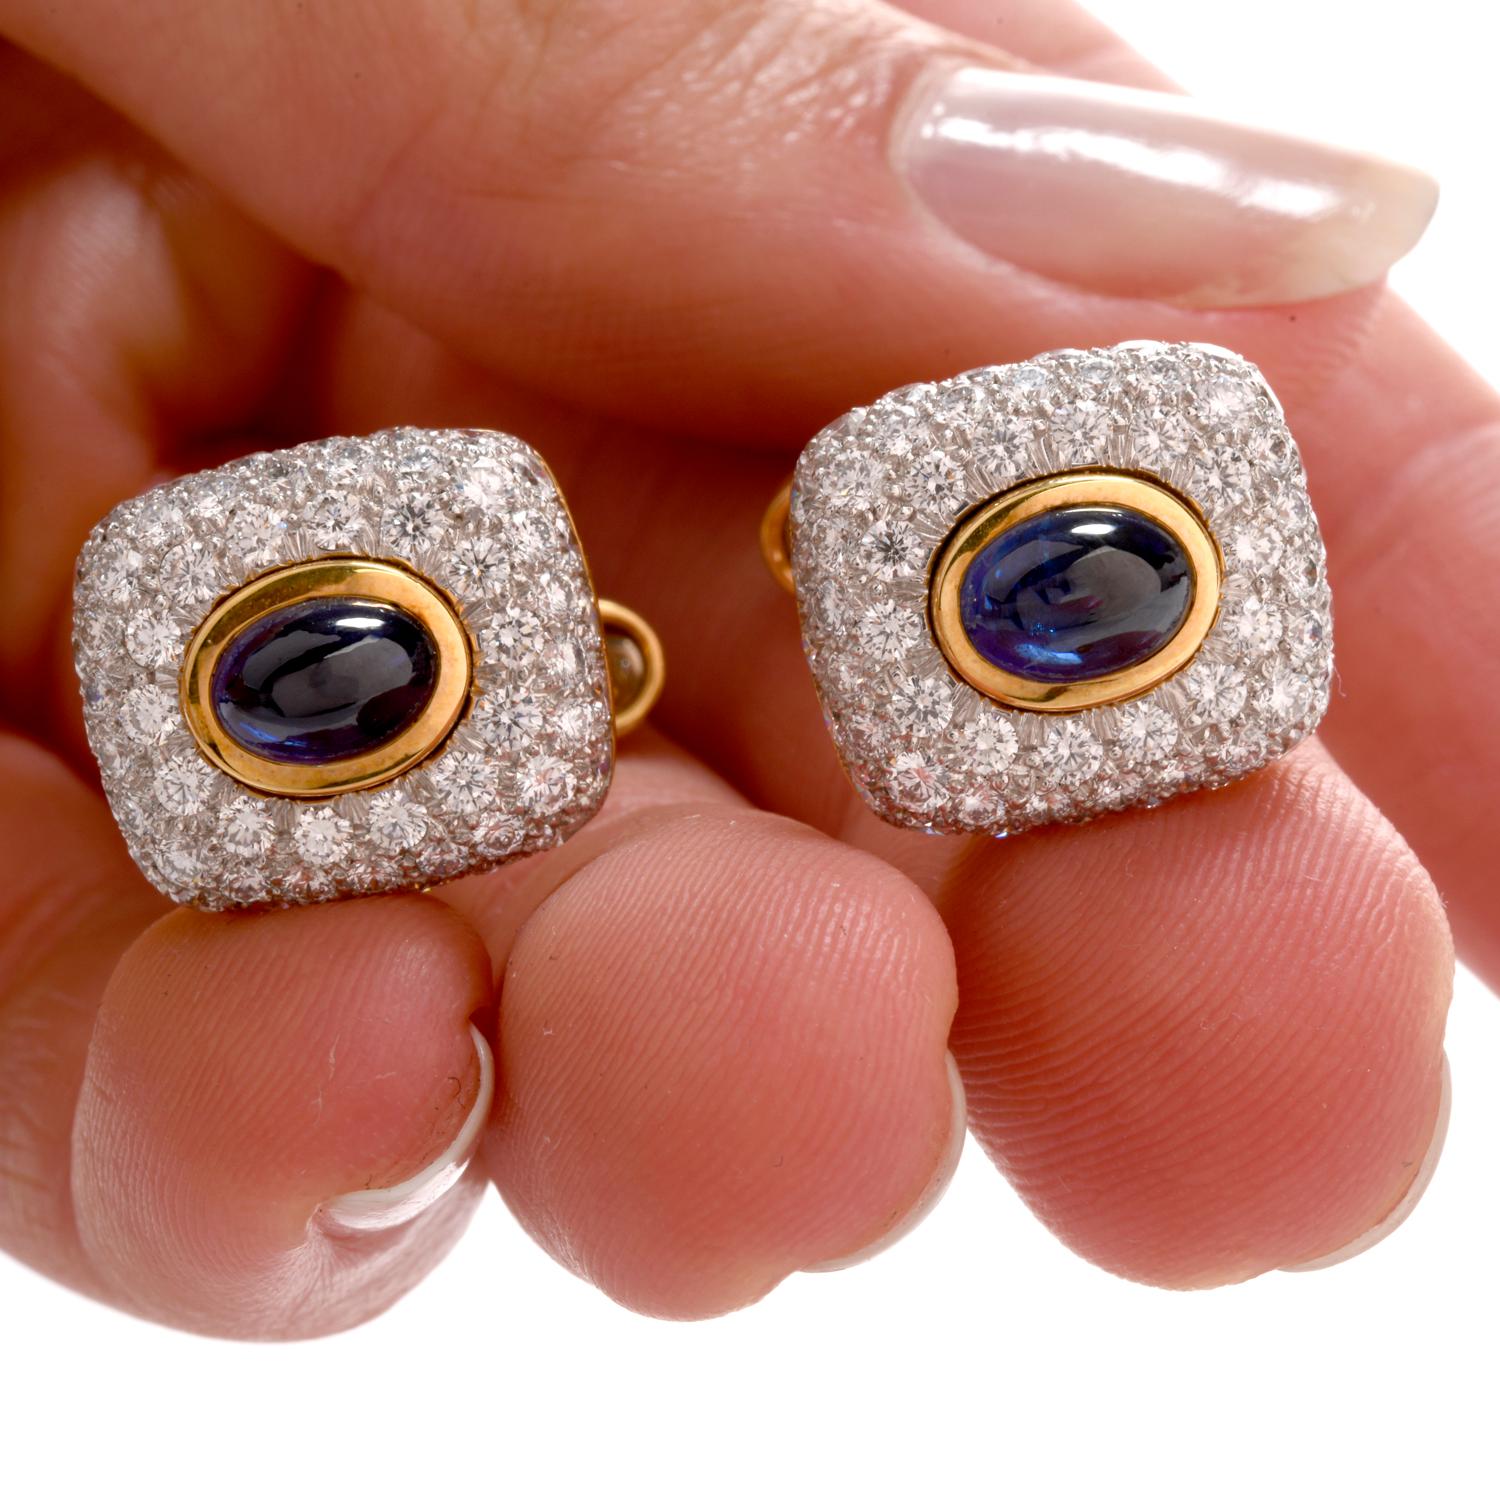 This Spectacular pair of Cufflinks boasts of Style for the gentleman wearing them.

Featuring an oval cabochon cut Sapphire in each measuring appx. 4.3 x 6.44,  bright white pave set Diamonds cover the remaining surface of these 18K and Platinum